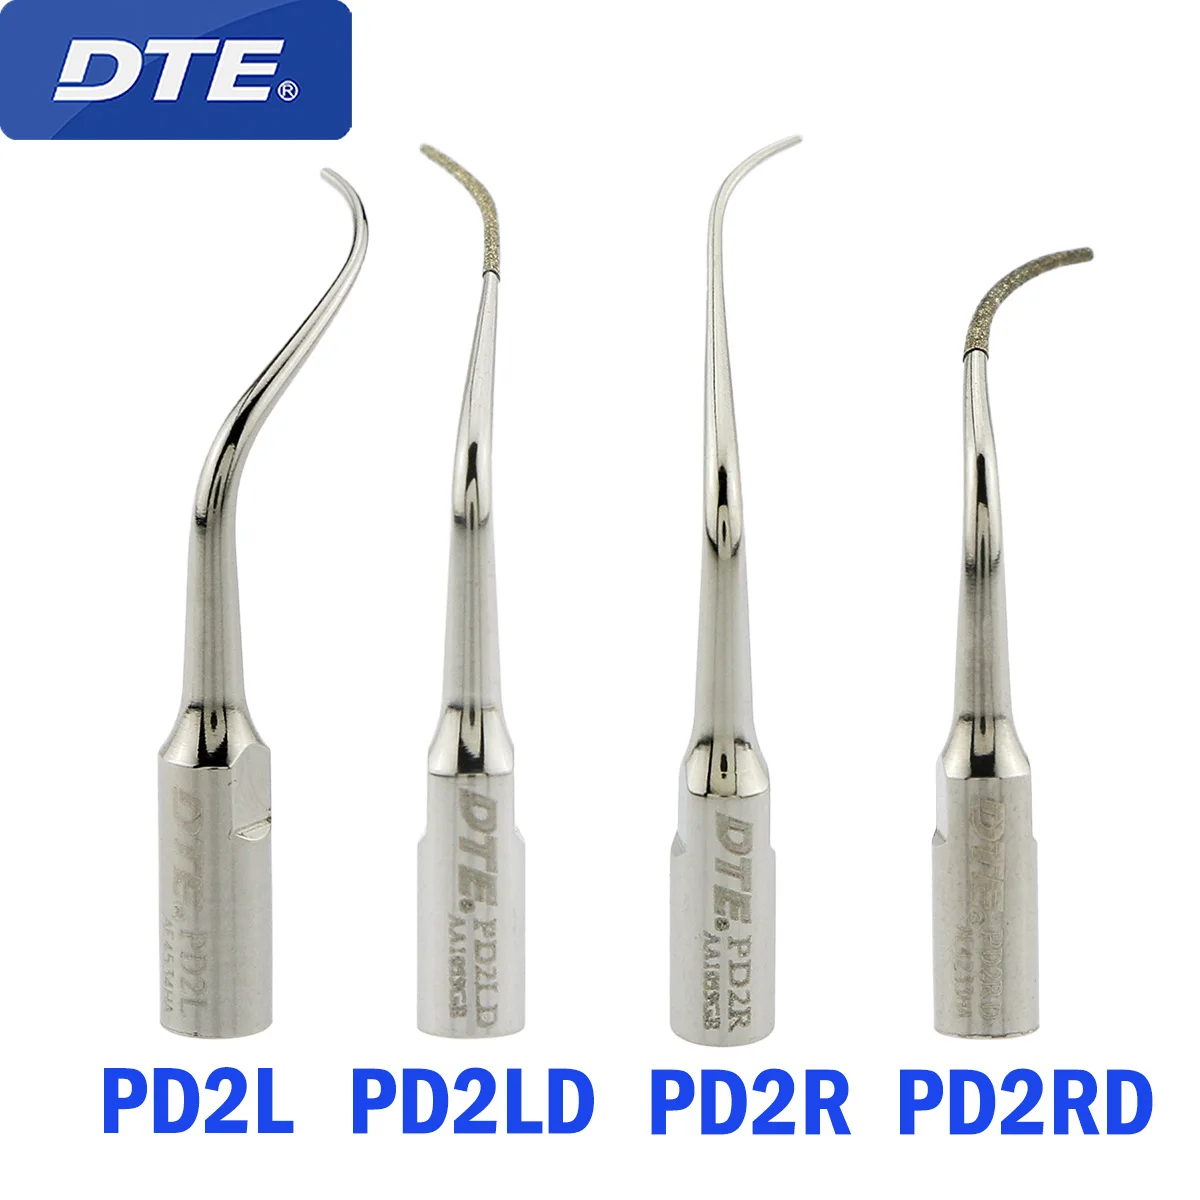 

Woodpecker DTE Dental Ultrasonic Scaler Tips For Perio Fit NSK SATELEC ACTEON Ultrasonic Scaler Handpiece PD2L PD2LD PD2R PD2R